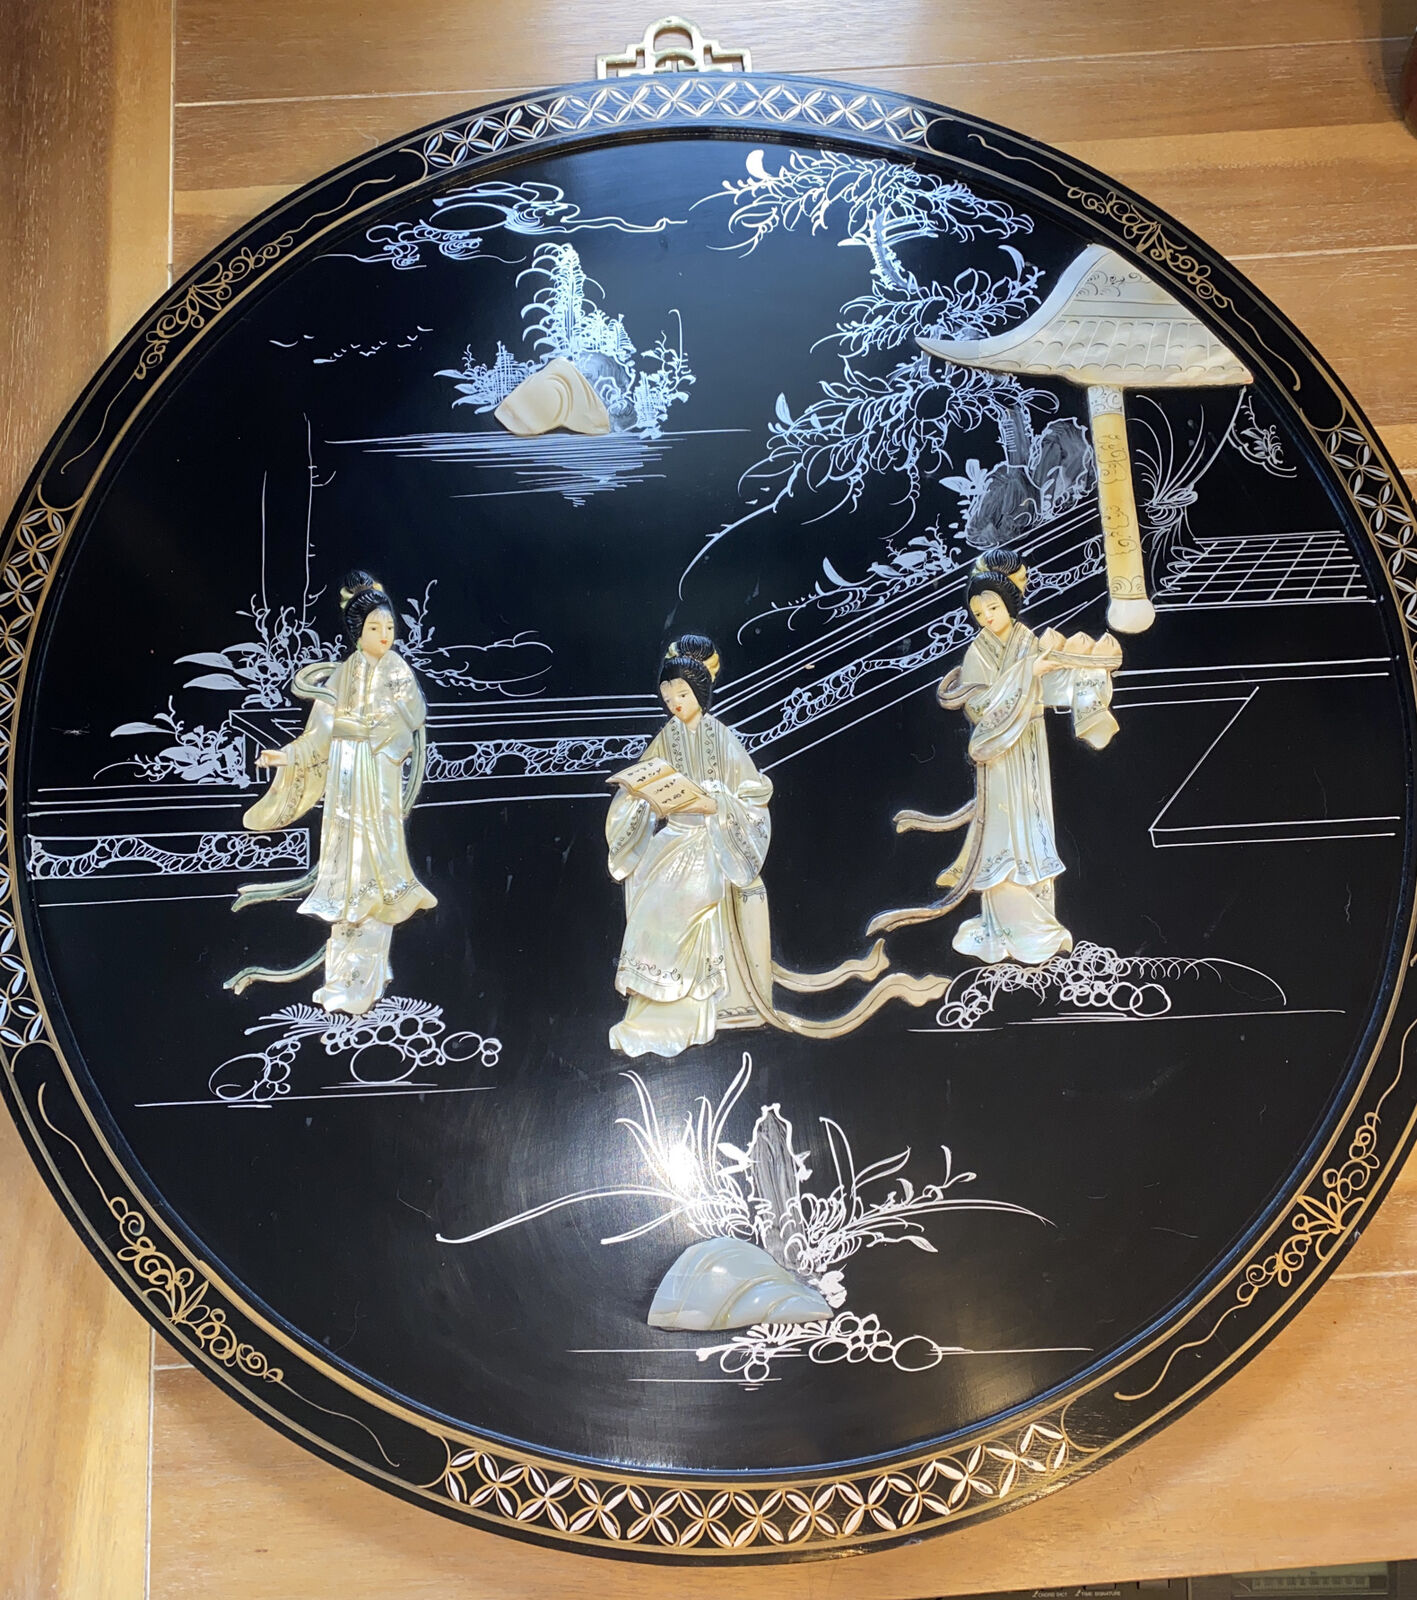 30” Vintage Chinese Wall Art Round Black Lacquer Mother of Pearl Geisha Plaque